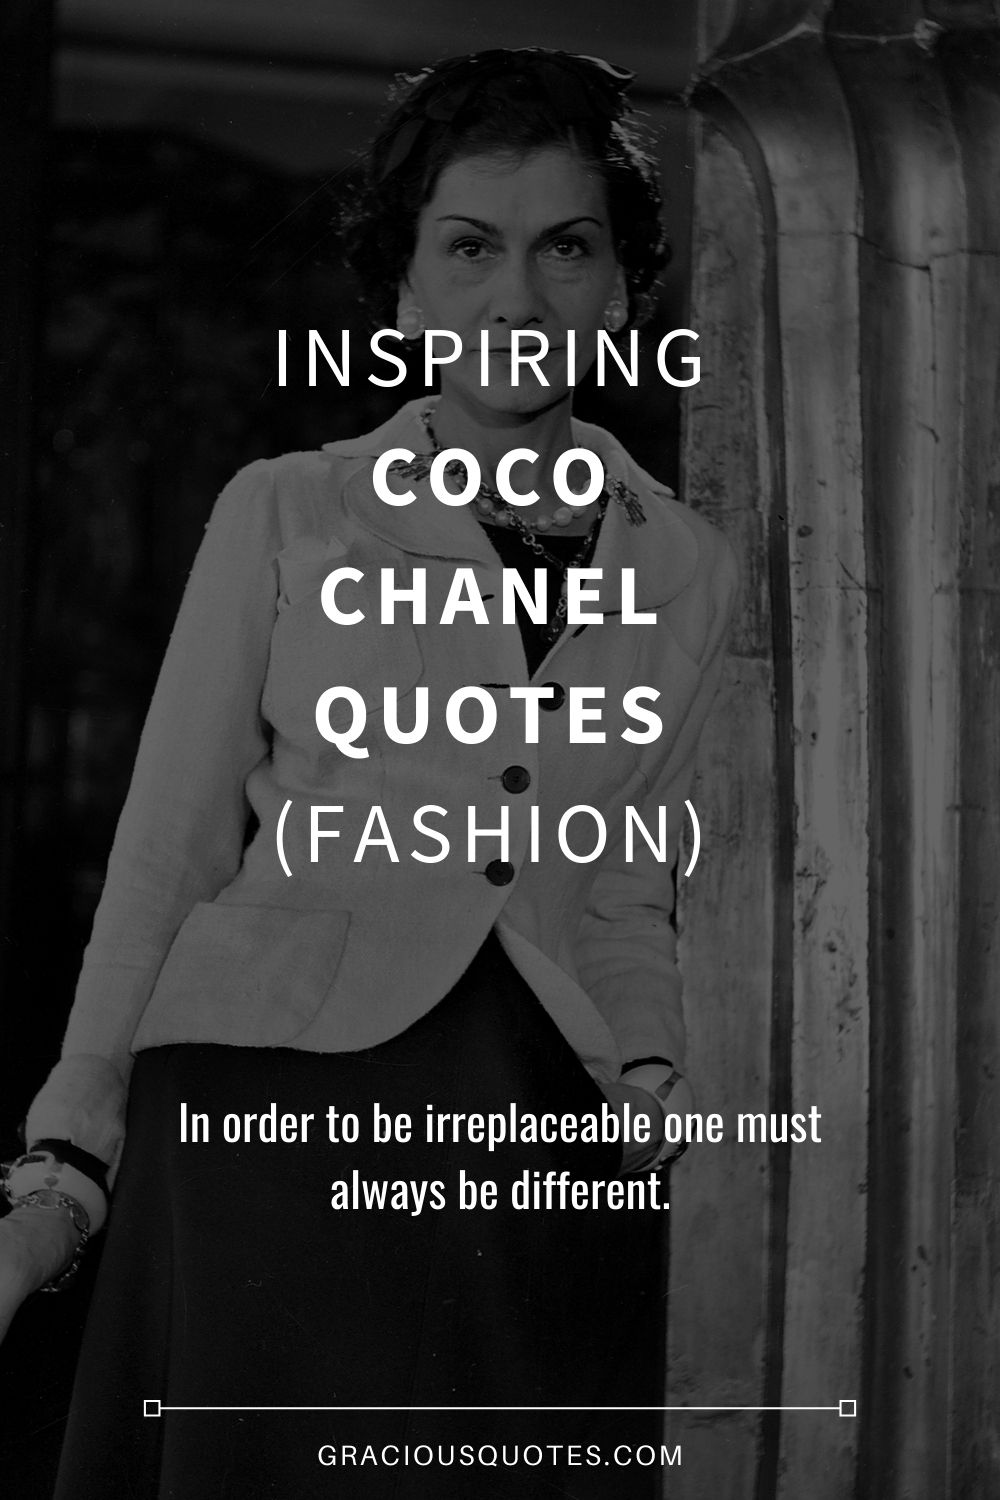 51 Inspiring Coco Chanel Quotes